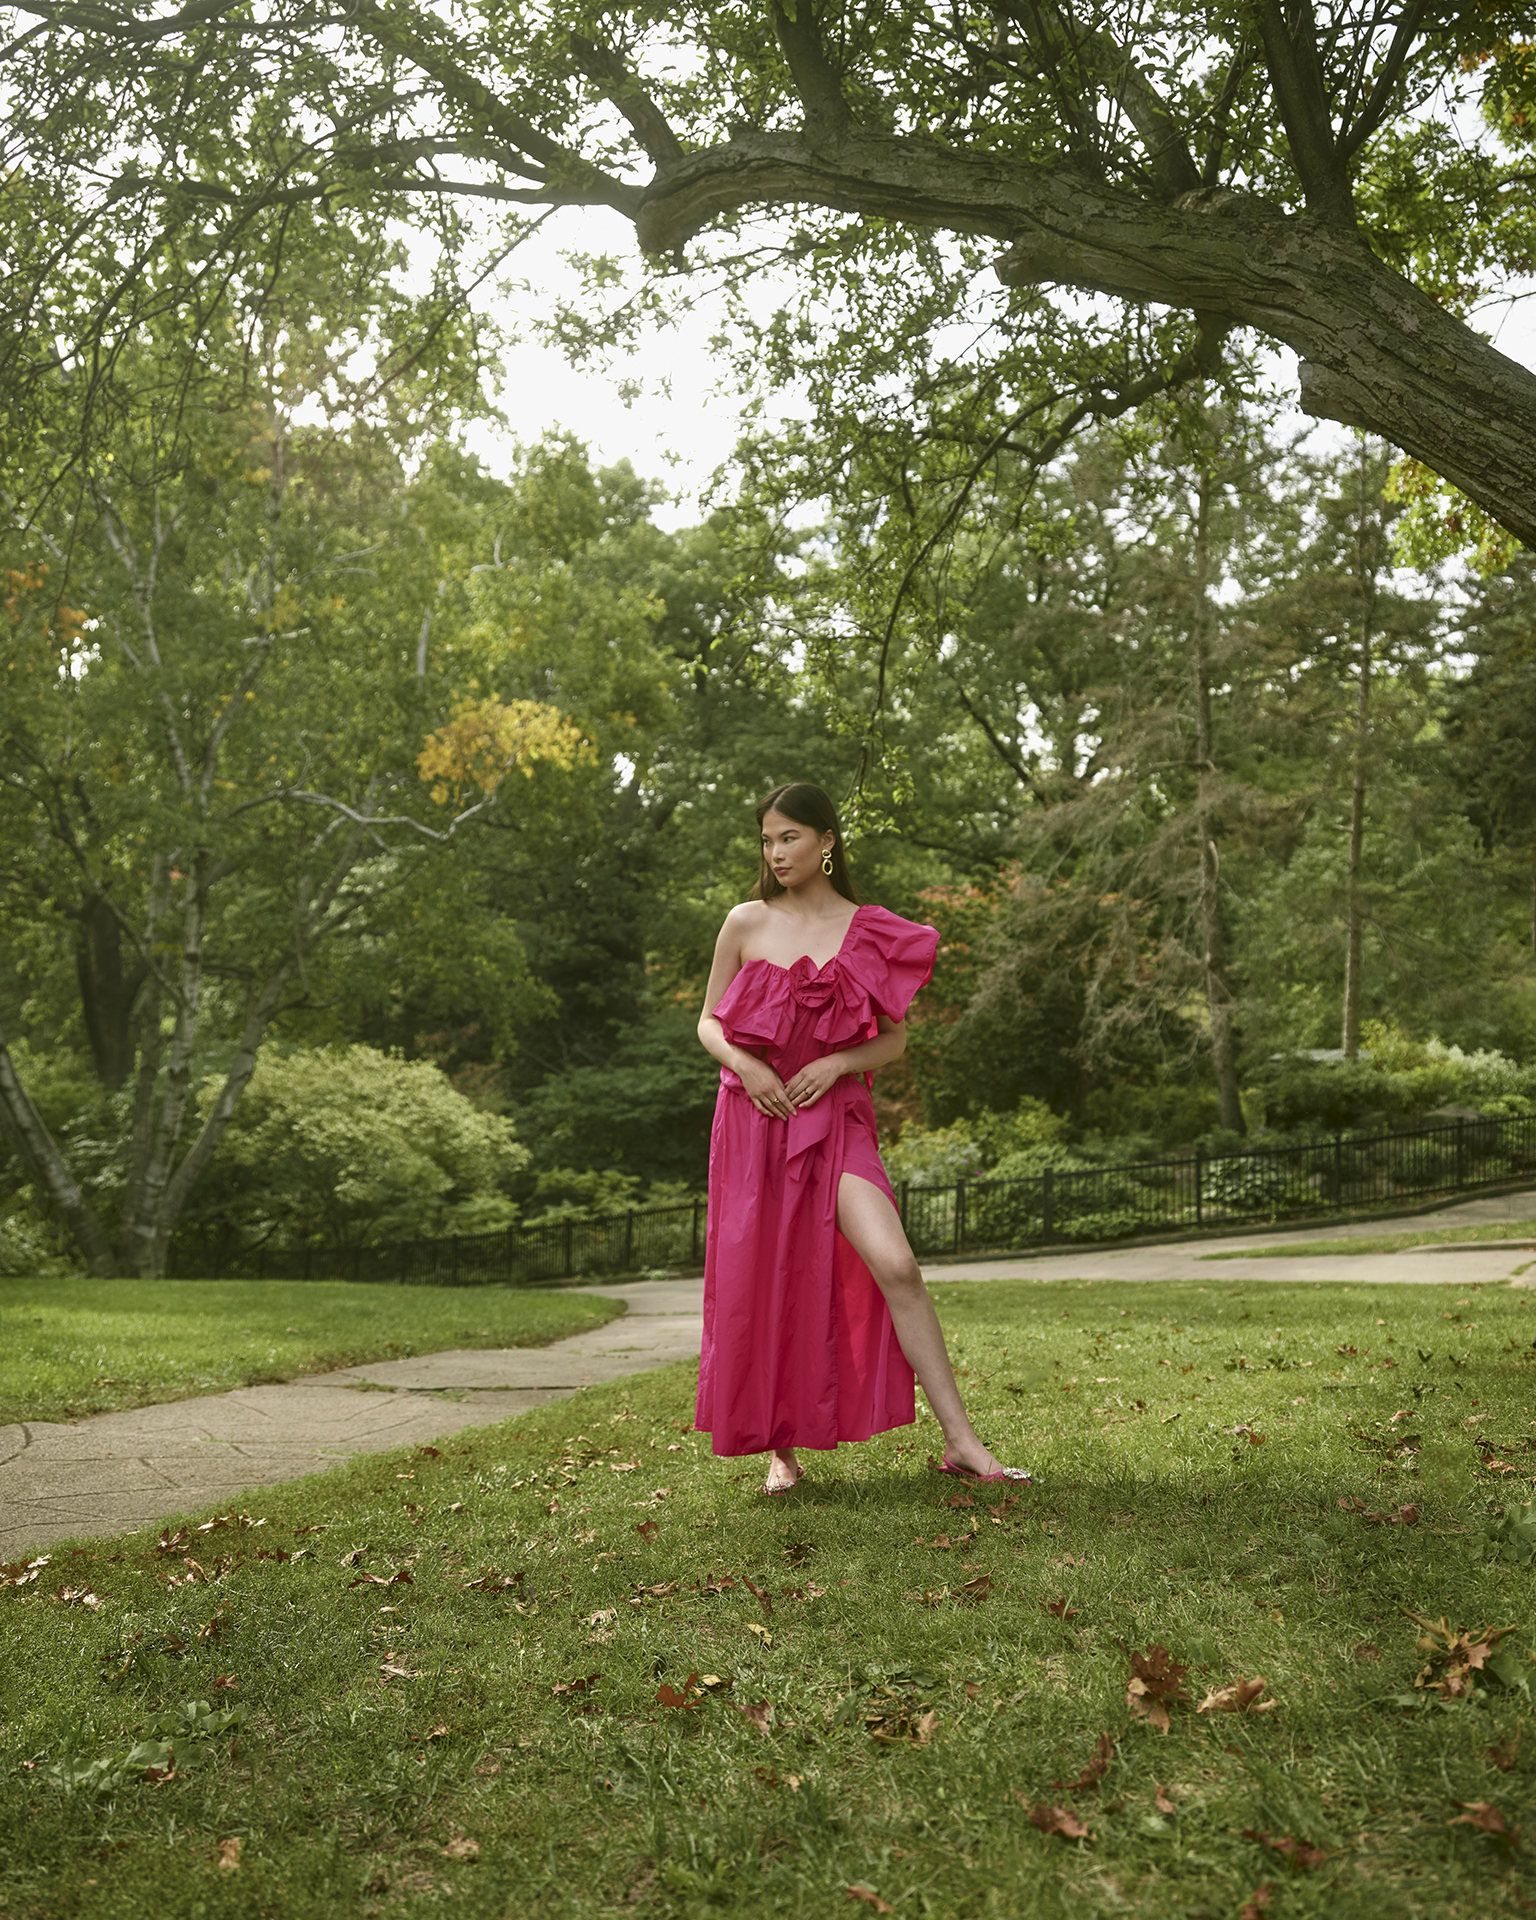 In this image, a female Asian subject is standing in the middle of the composition wearing a pink dress. She has one leg out of the dress’ slit and both her hands in front of her. On her left side is a tree that grows diagonally across the image. Far behind her are three parkways and more greenery that take up most of the image.